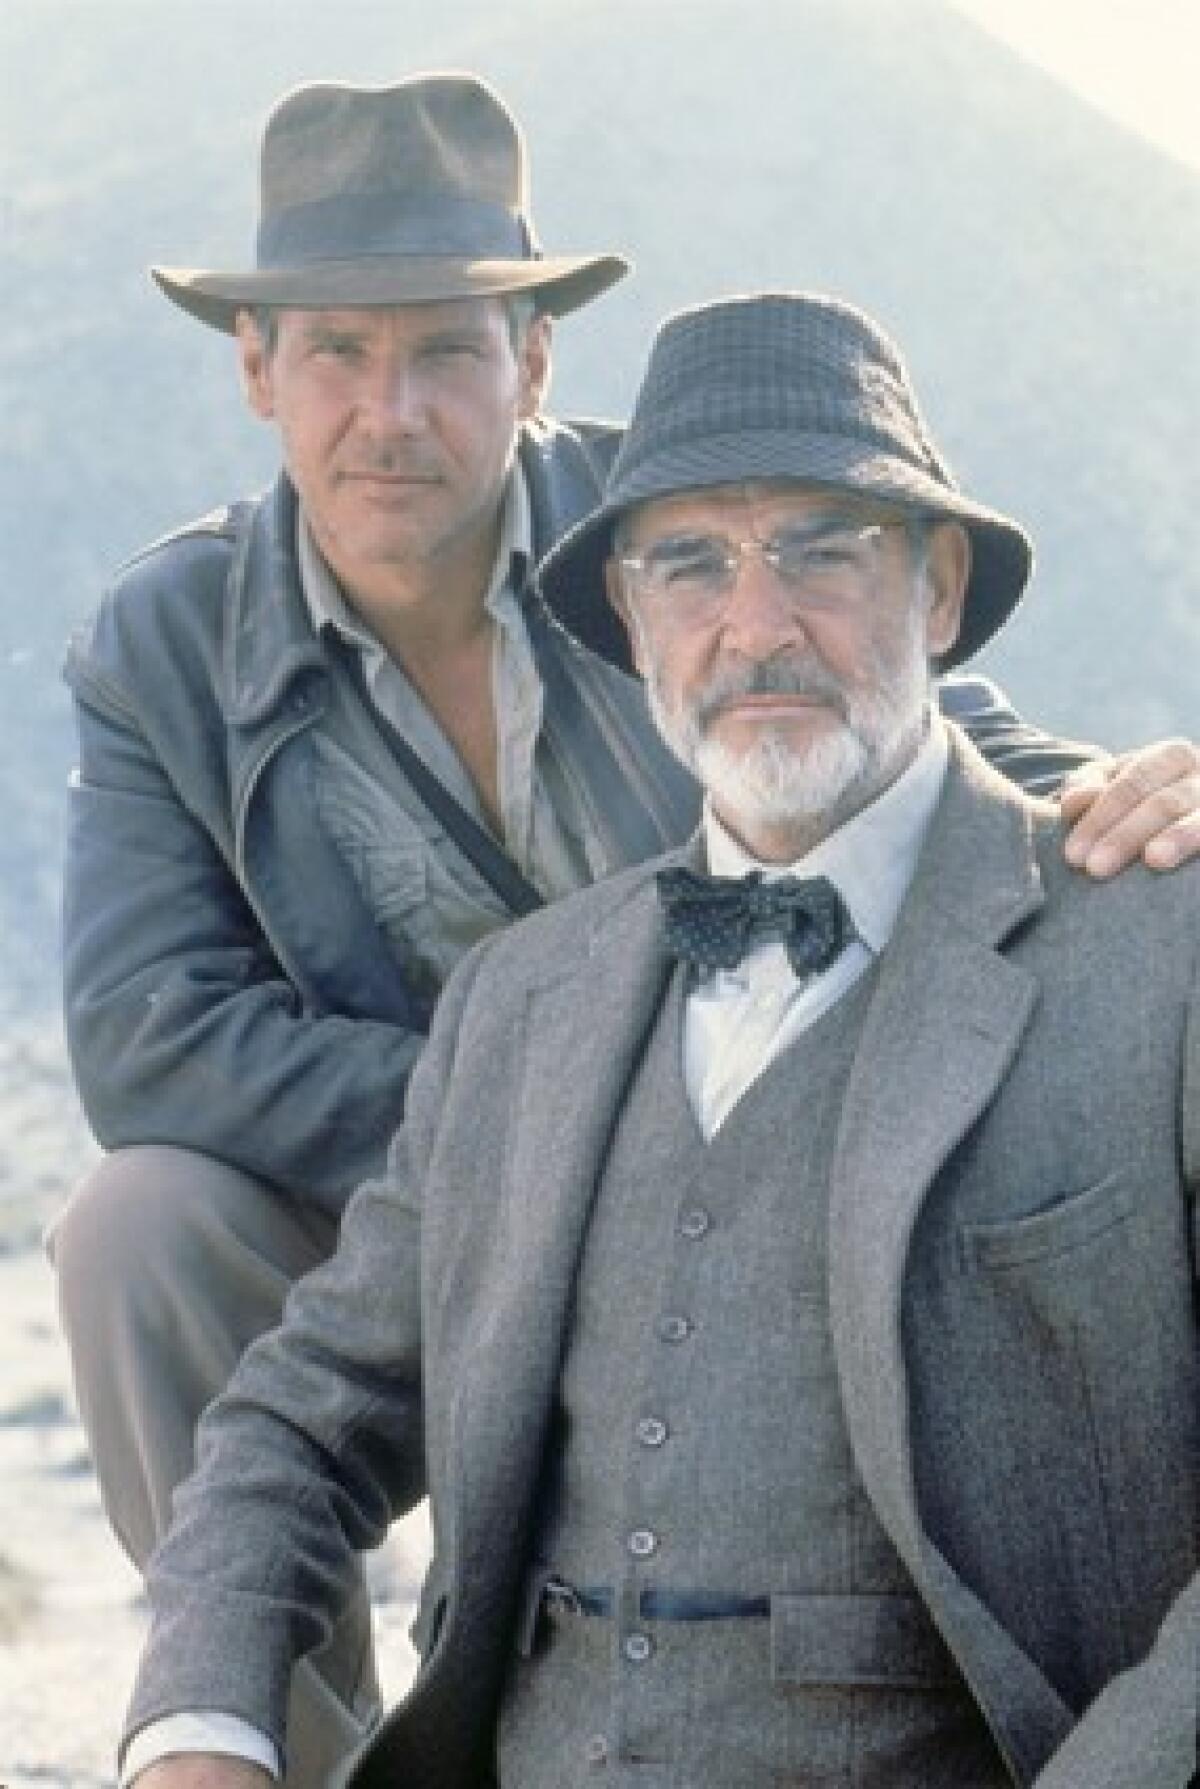 Harrison Ford and Sean Connery